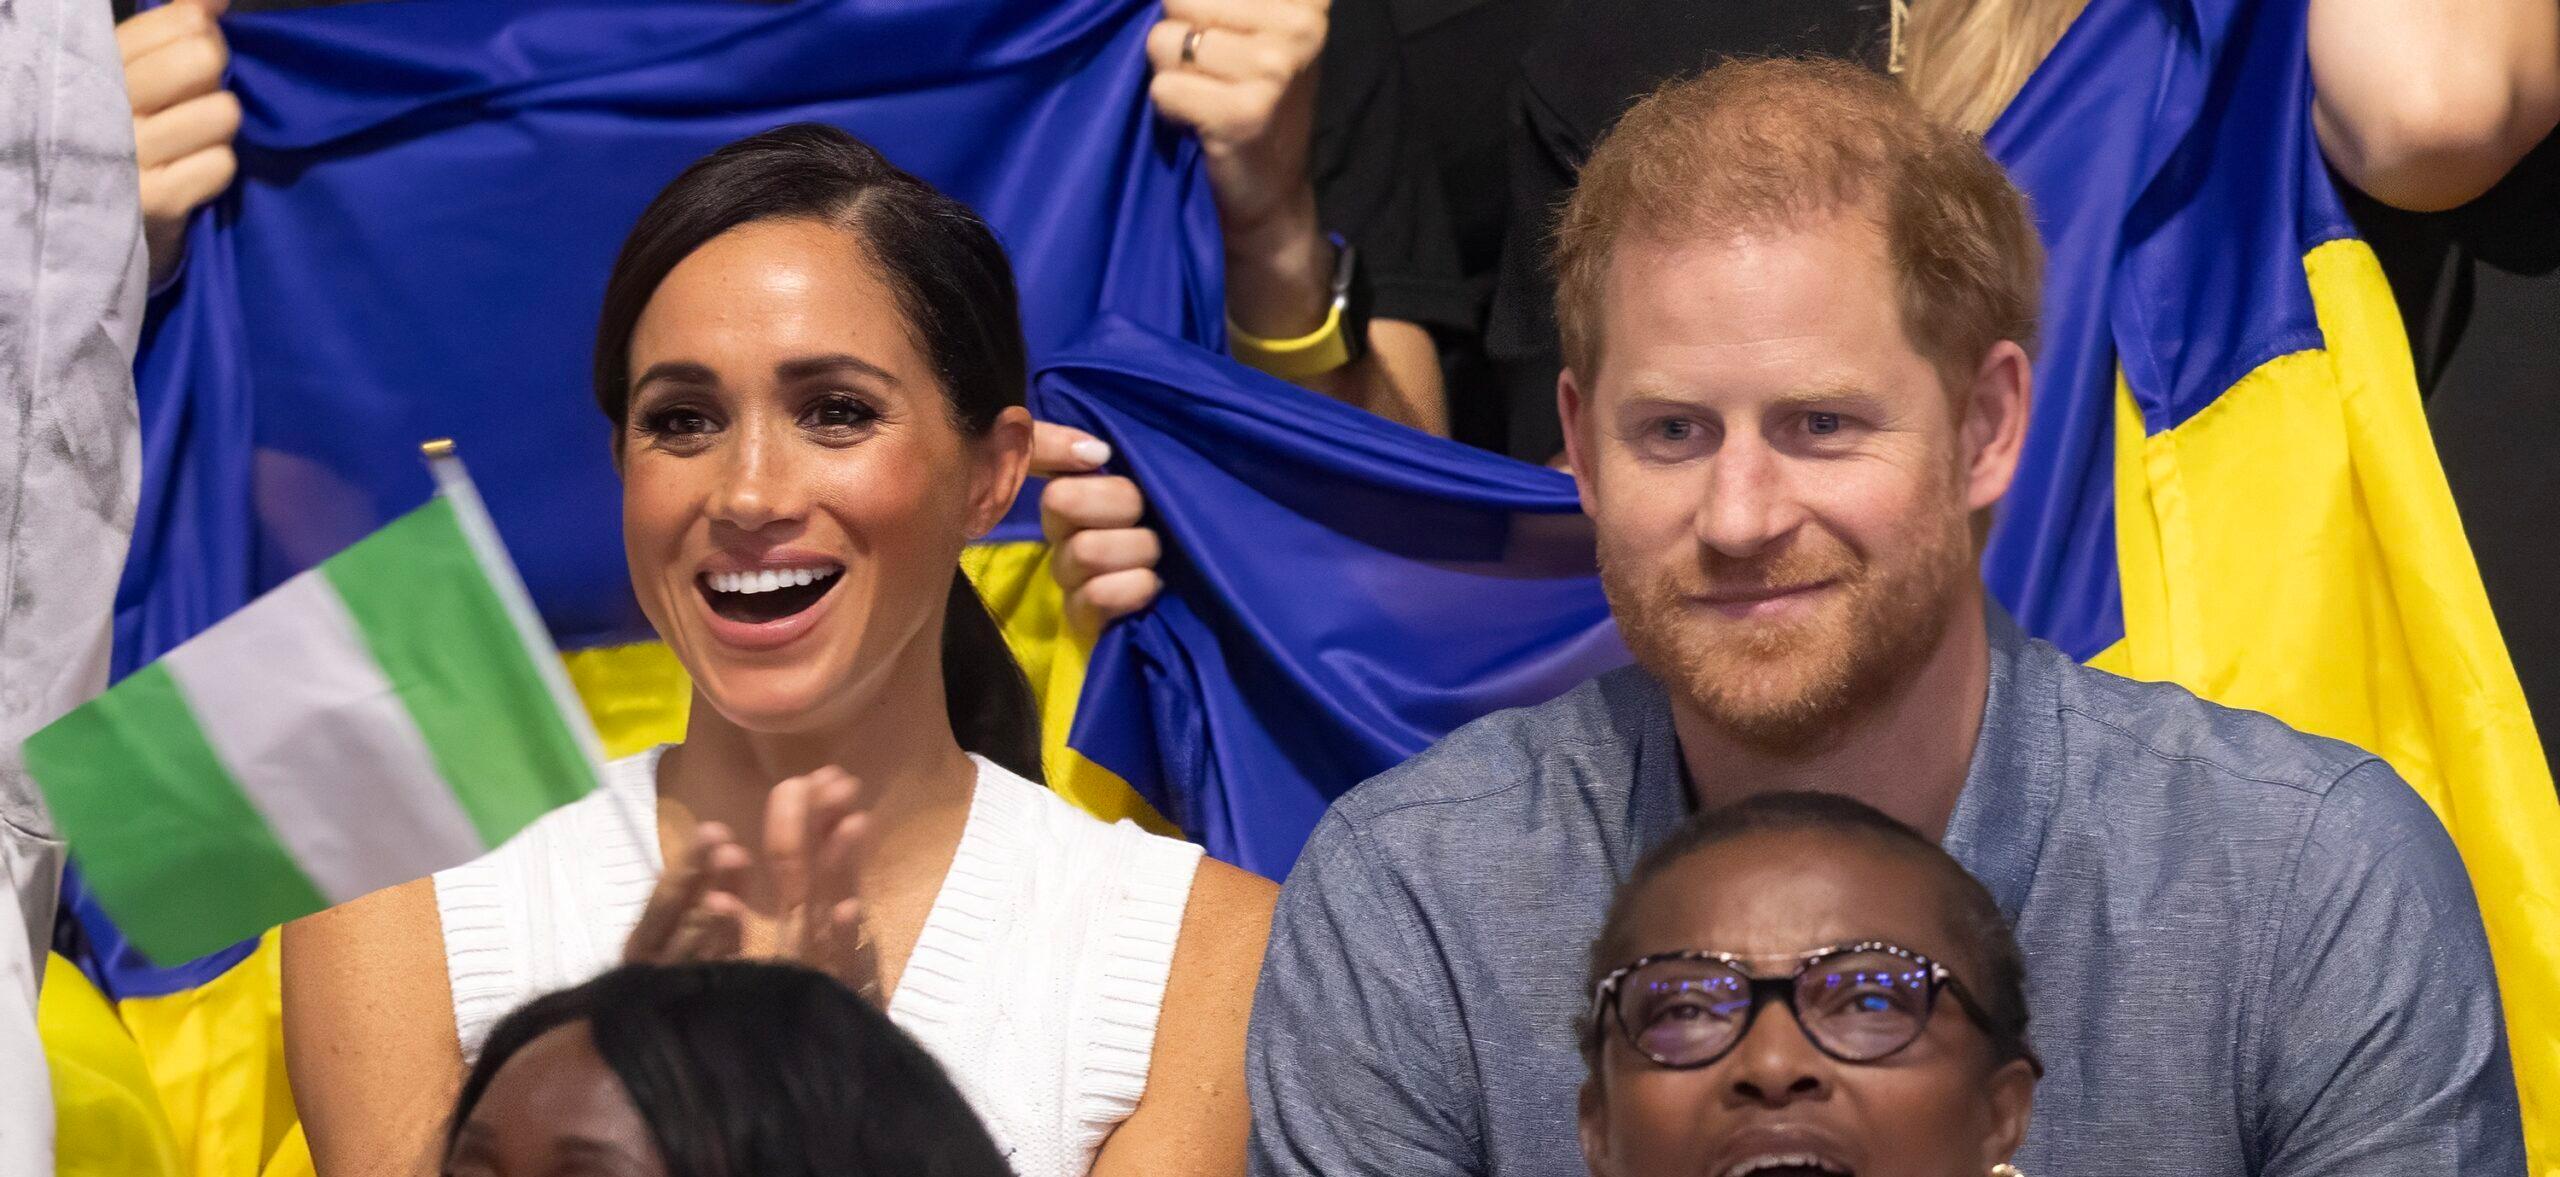 Prince Harry And Meghan Markle Criticized Over ‘Presidential-Style’ Security In Nigeria